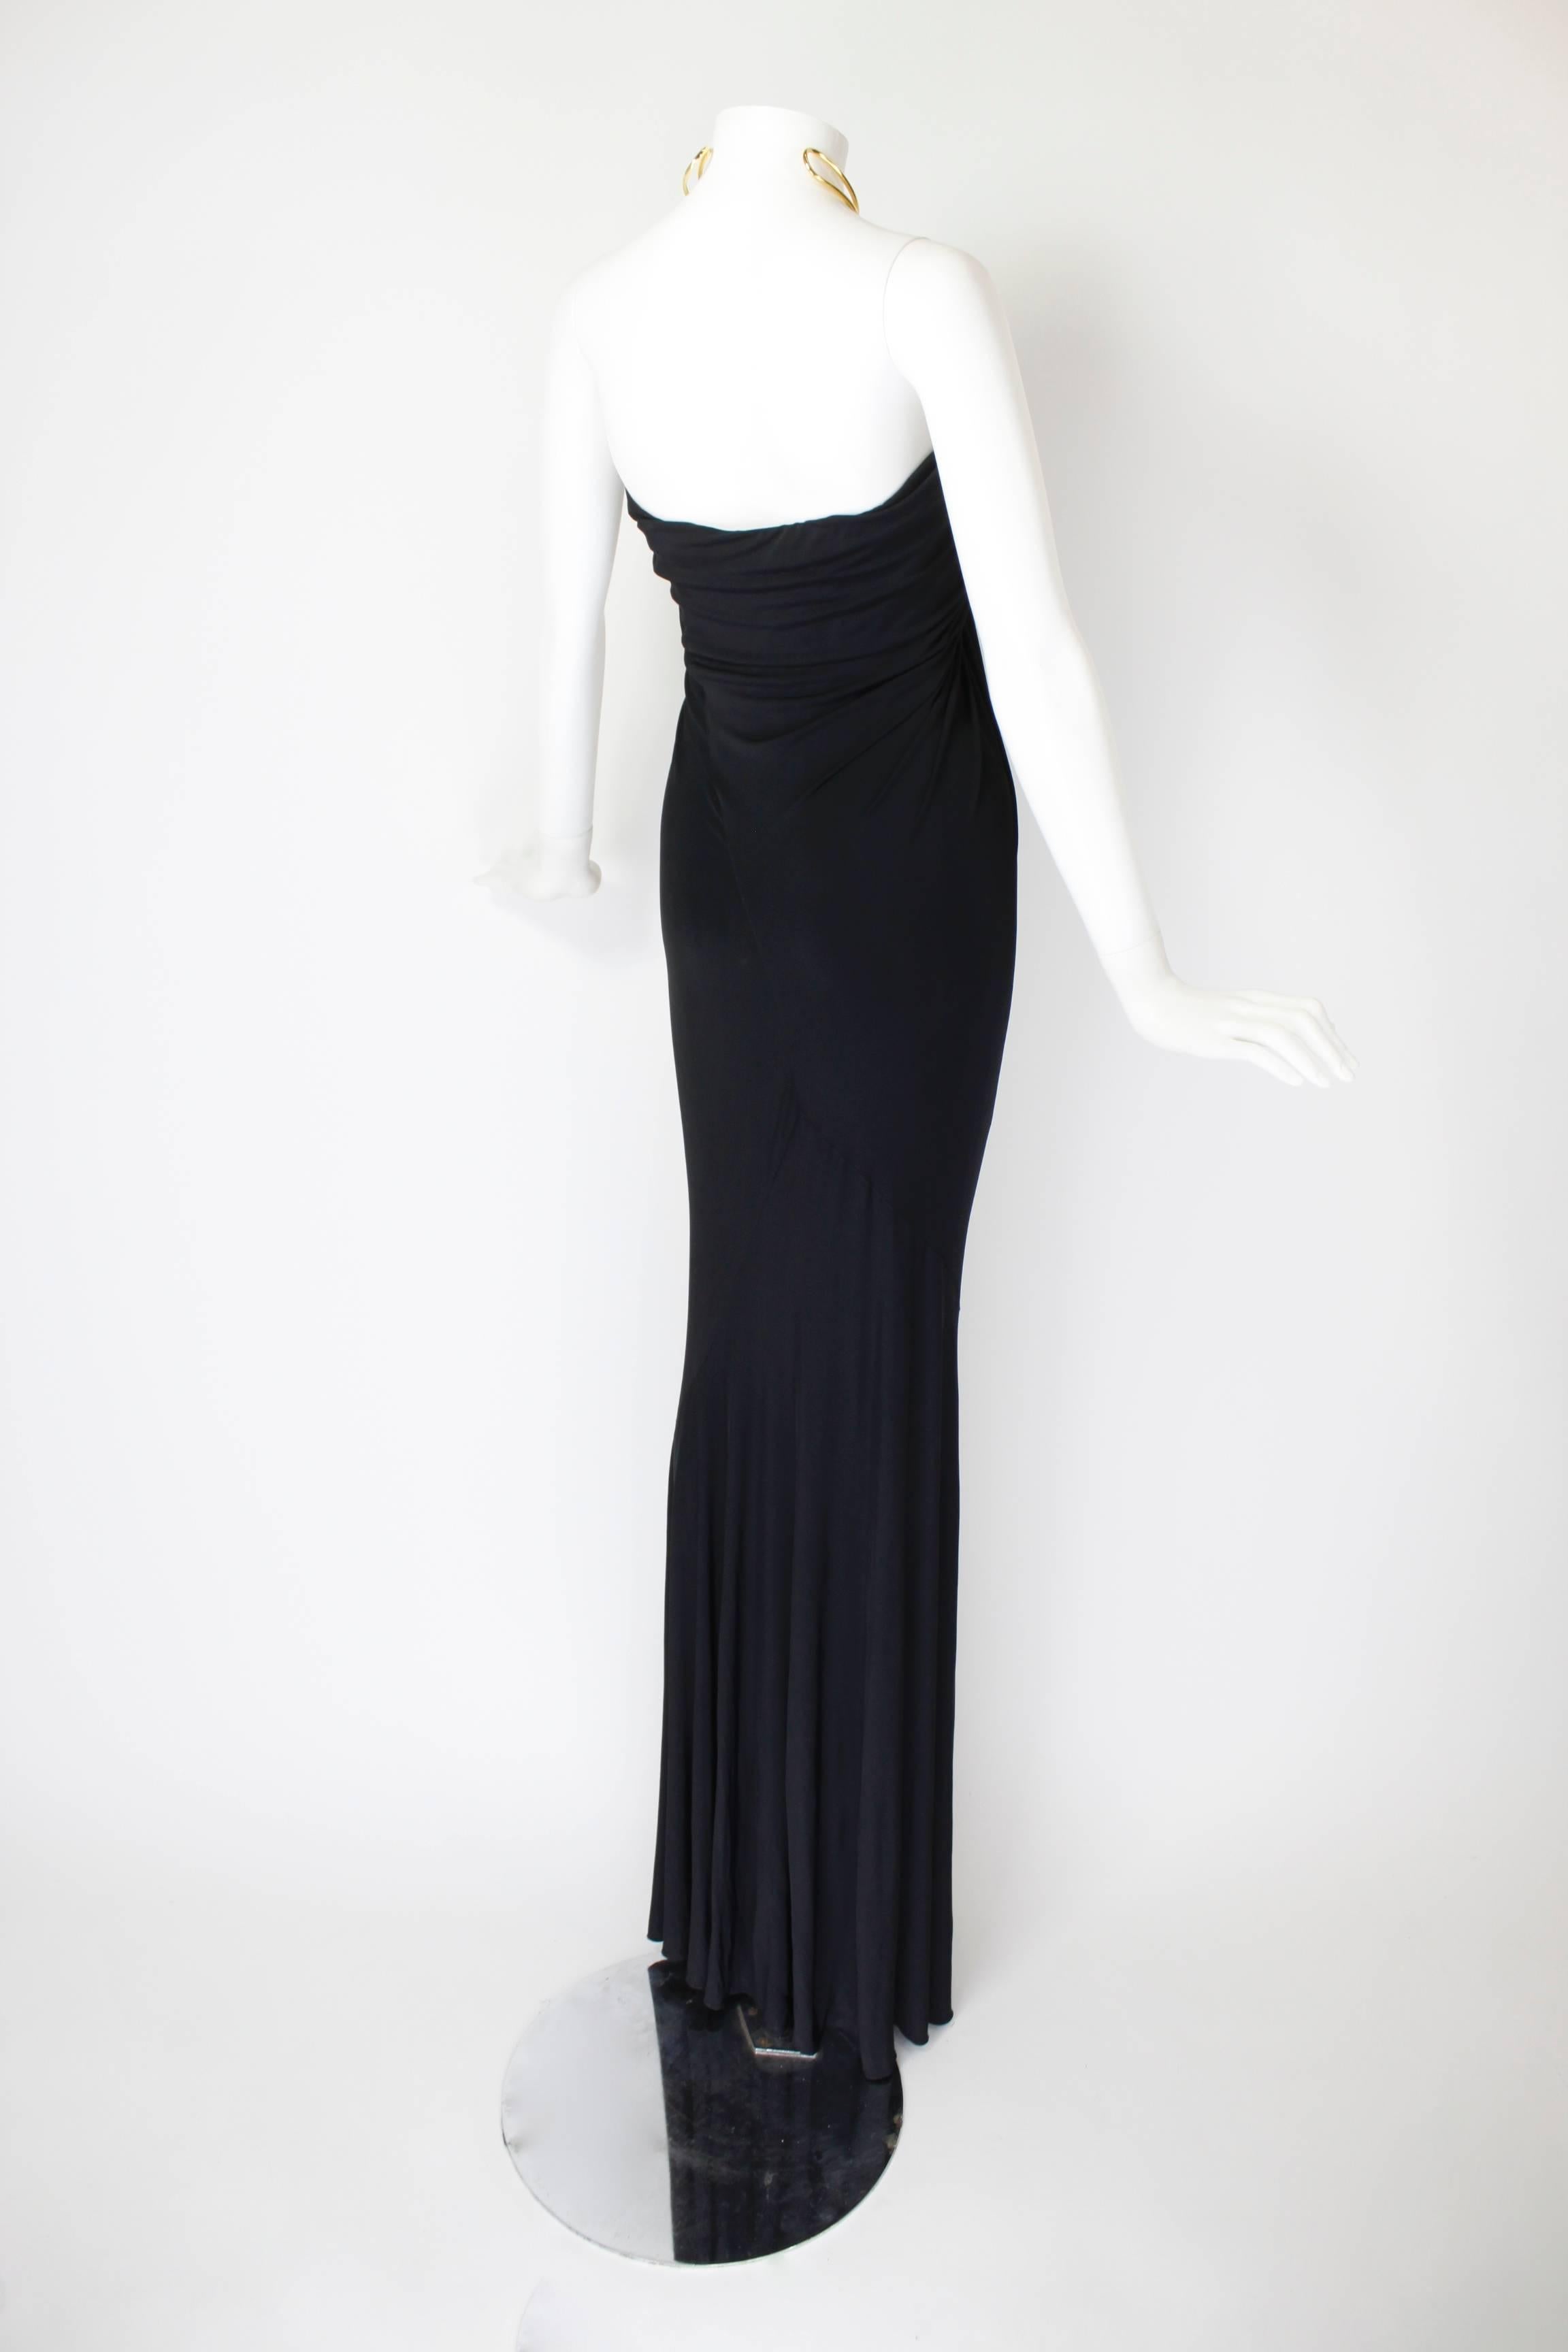 1990s Donna Karan Slinky Black Jersey Gown with Gold Choker Halter For Sale 1